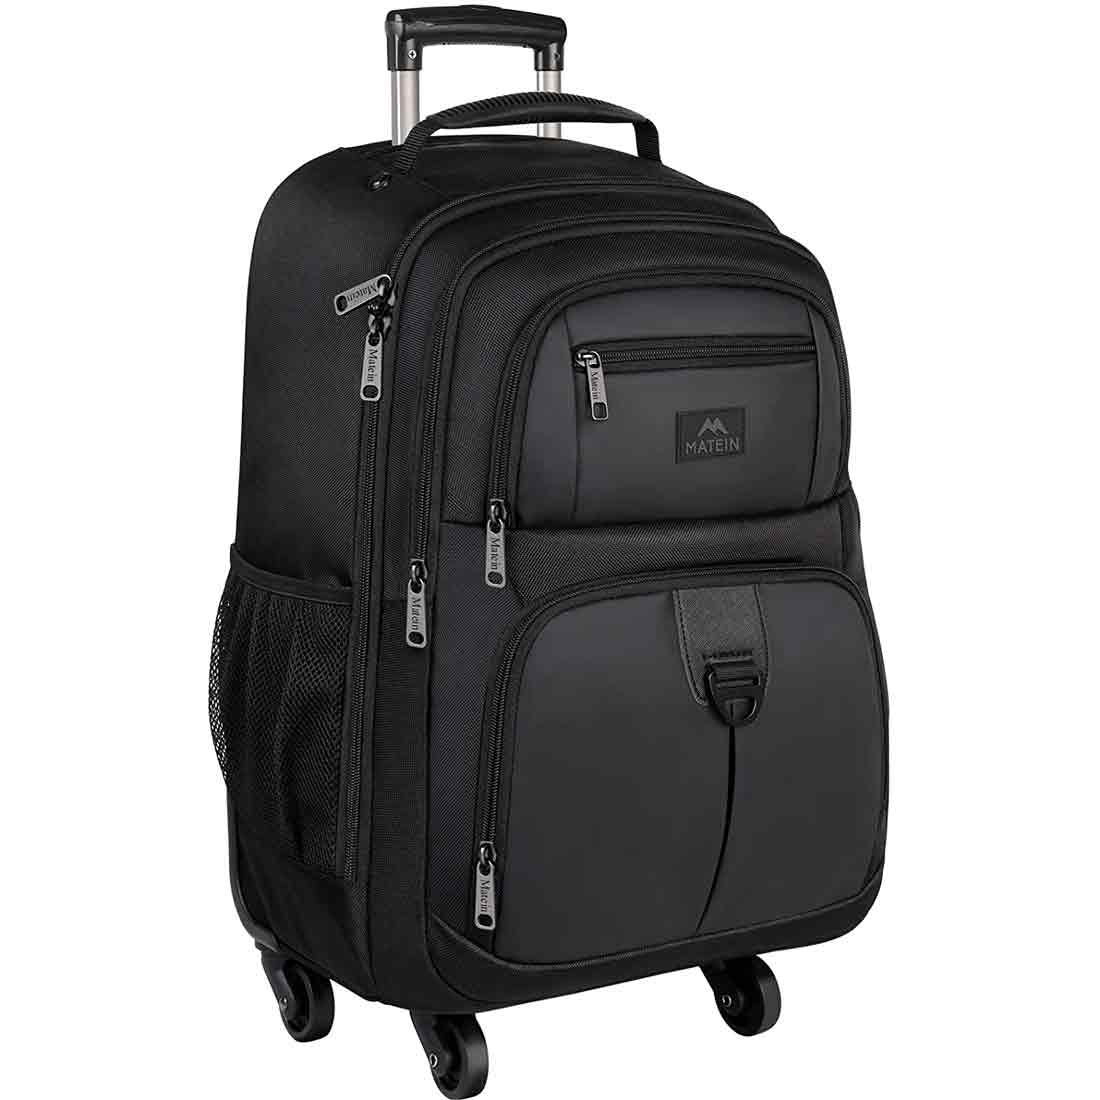 Matein Business Laptop Travel Luggage Wheeled Rolling Backpack - travel laptop backpack